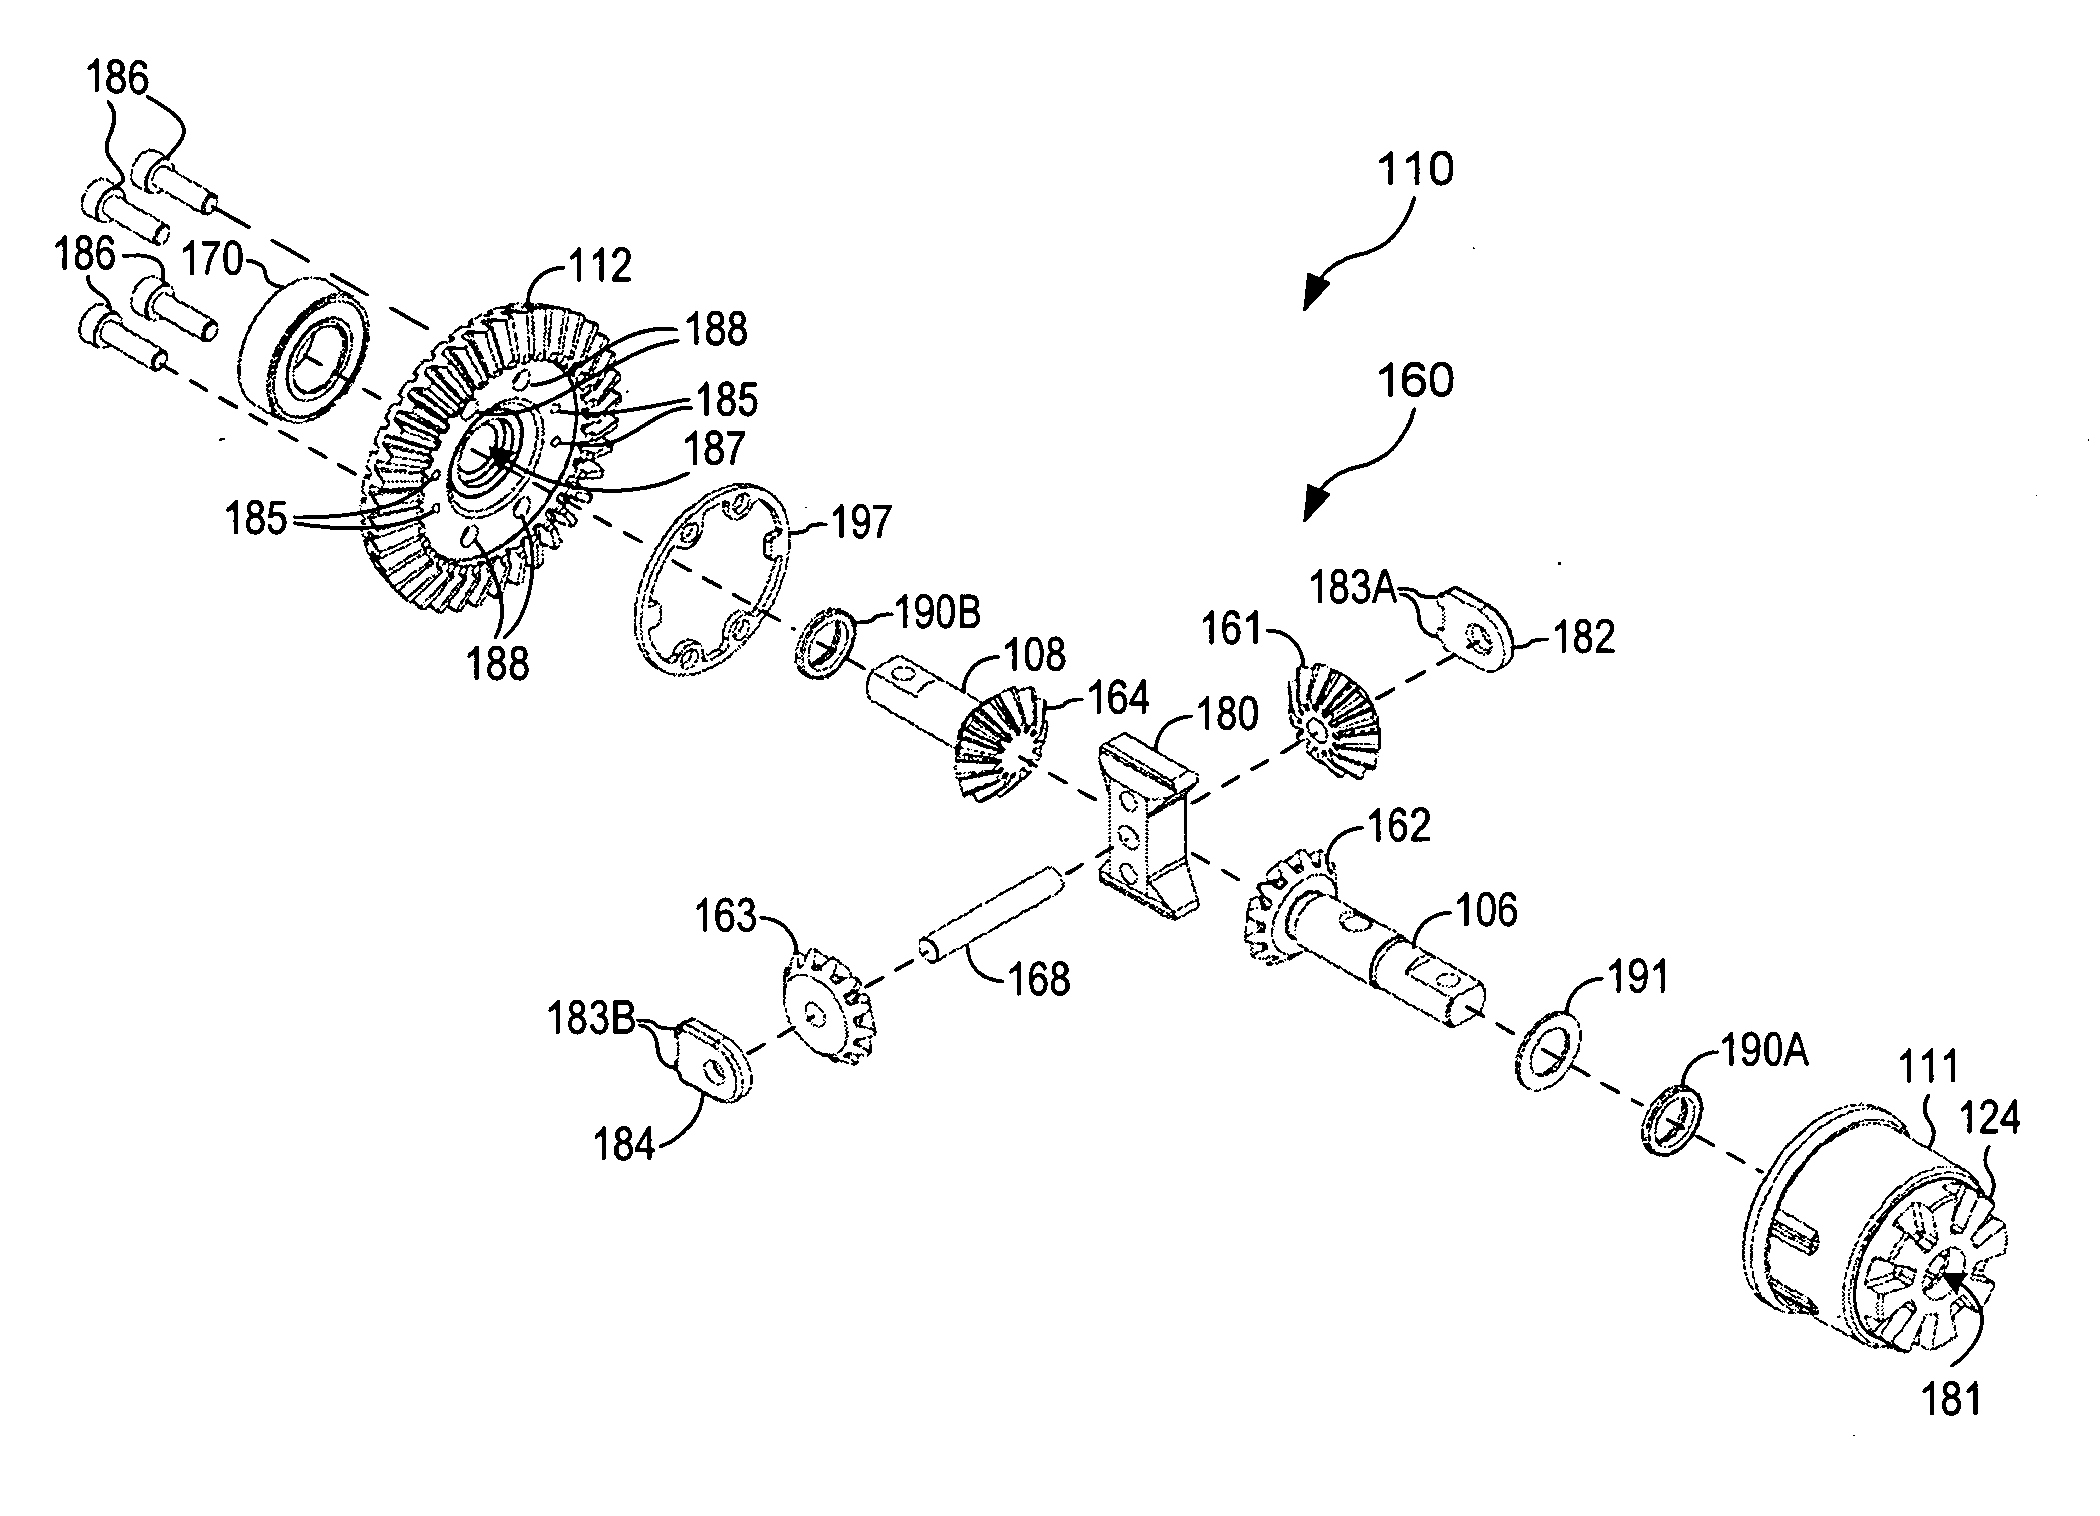 Locking differential assembly for a model vehicle